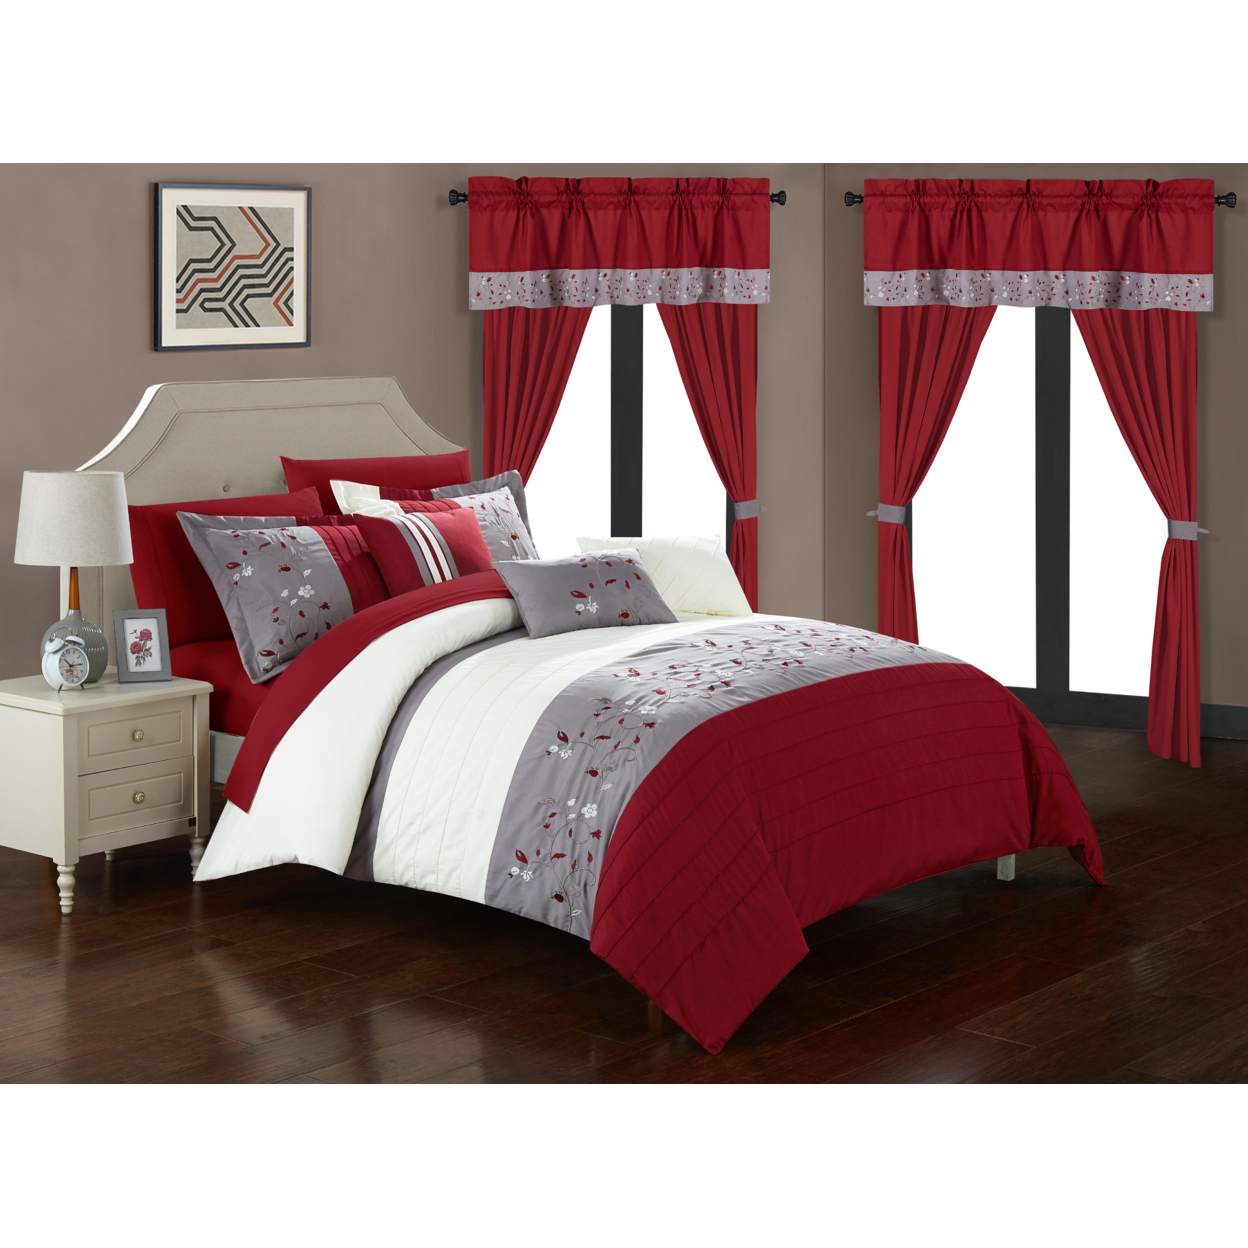 Sonita 20-Piece Bedding Set With Comforter, Sheets & Curtains, Mult. Colors - Red, King